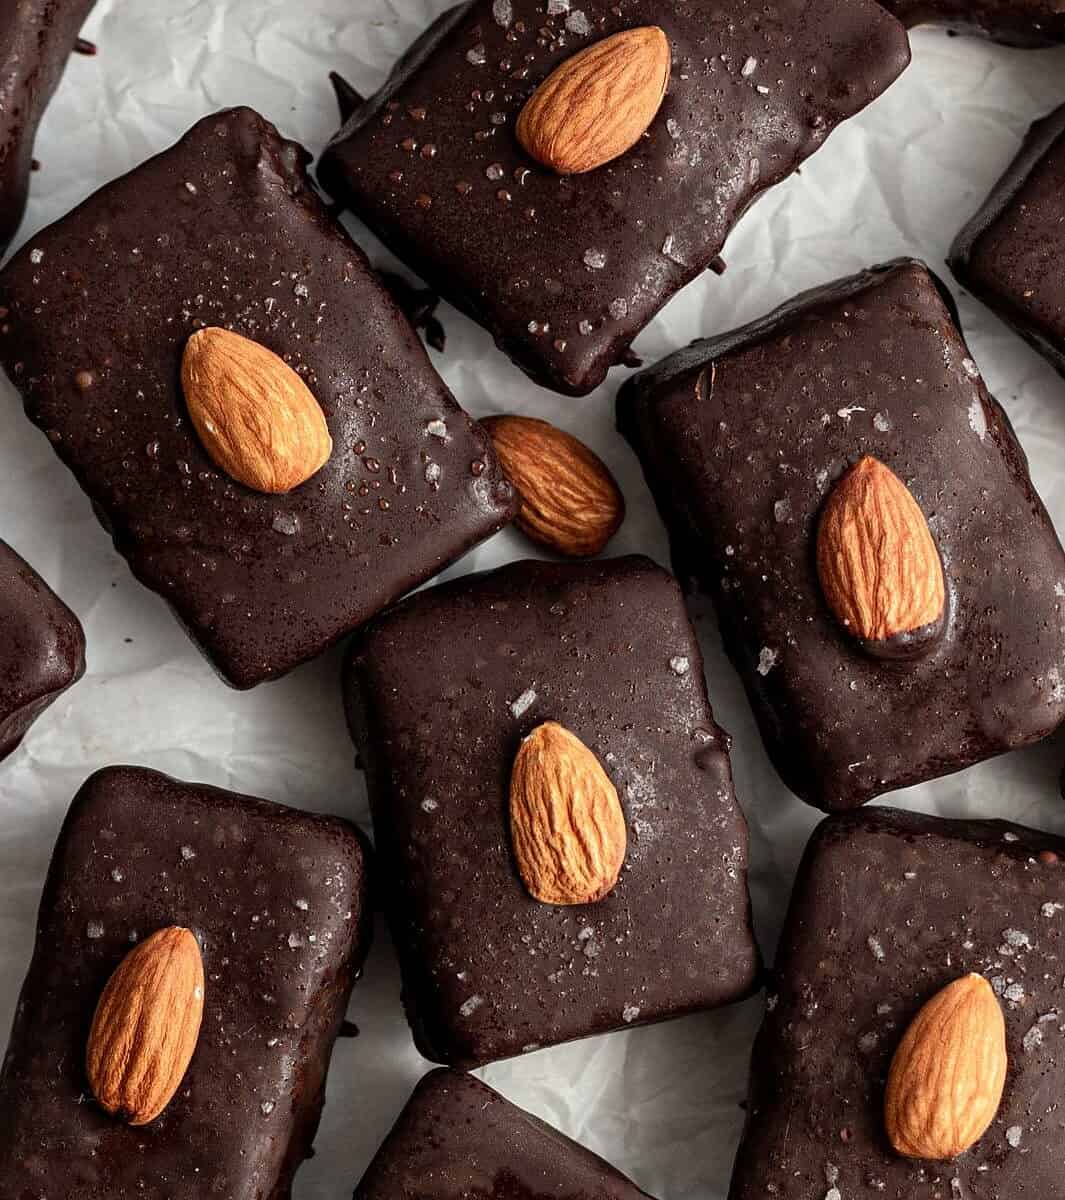  This vegan treat is so good, you won't even be able to tell it's dairy-free!